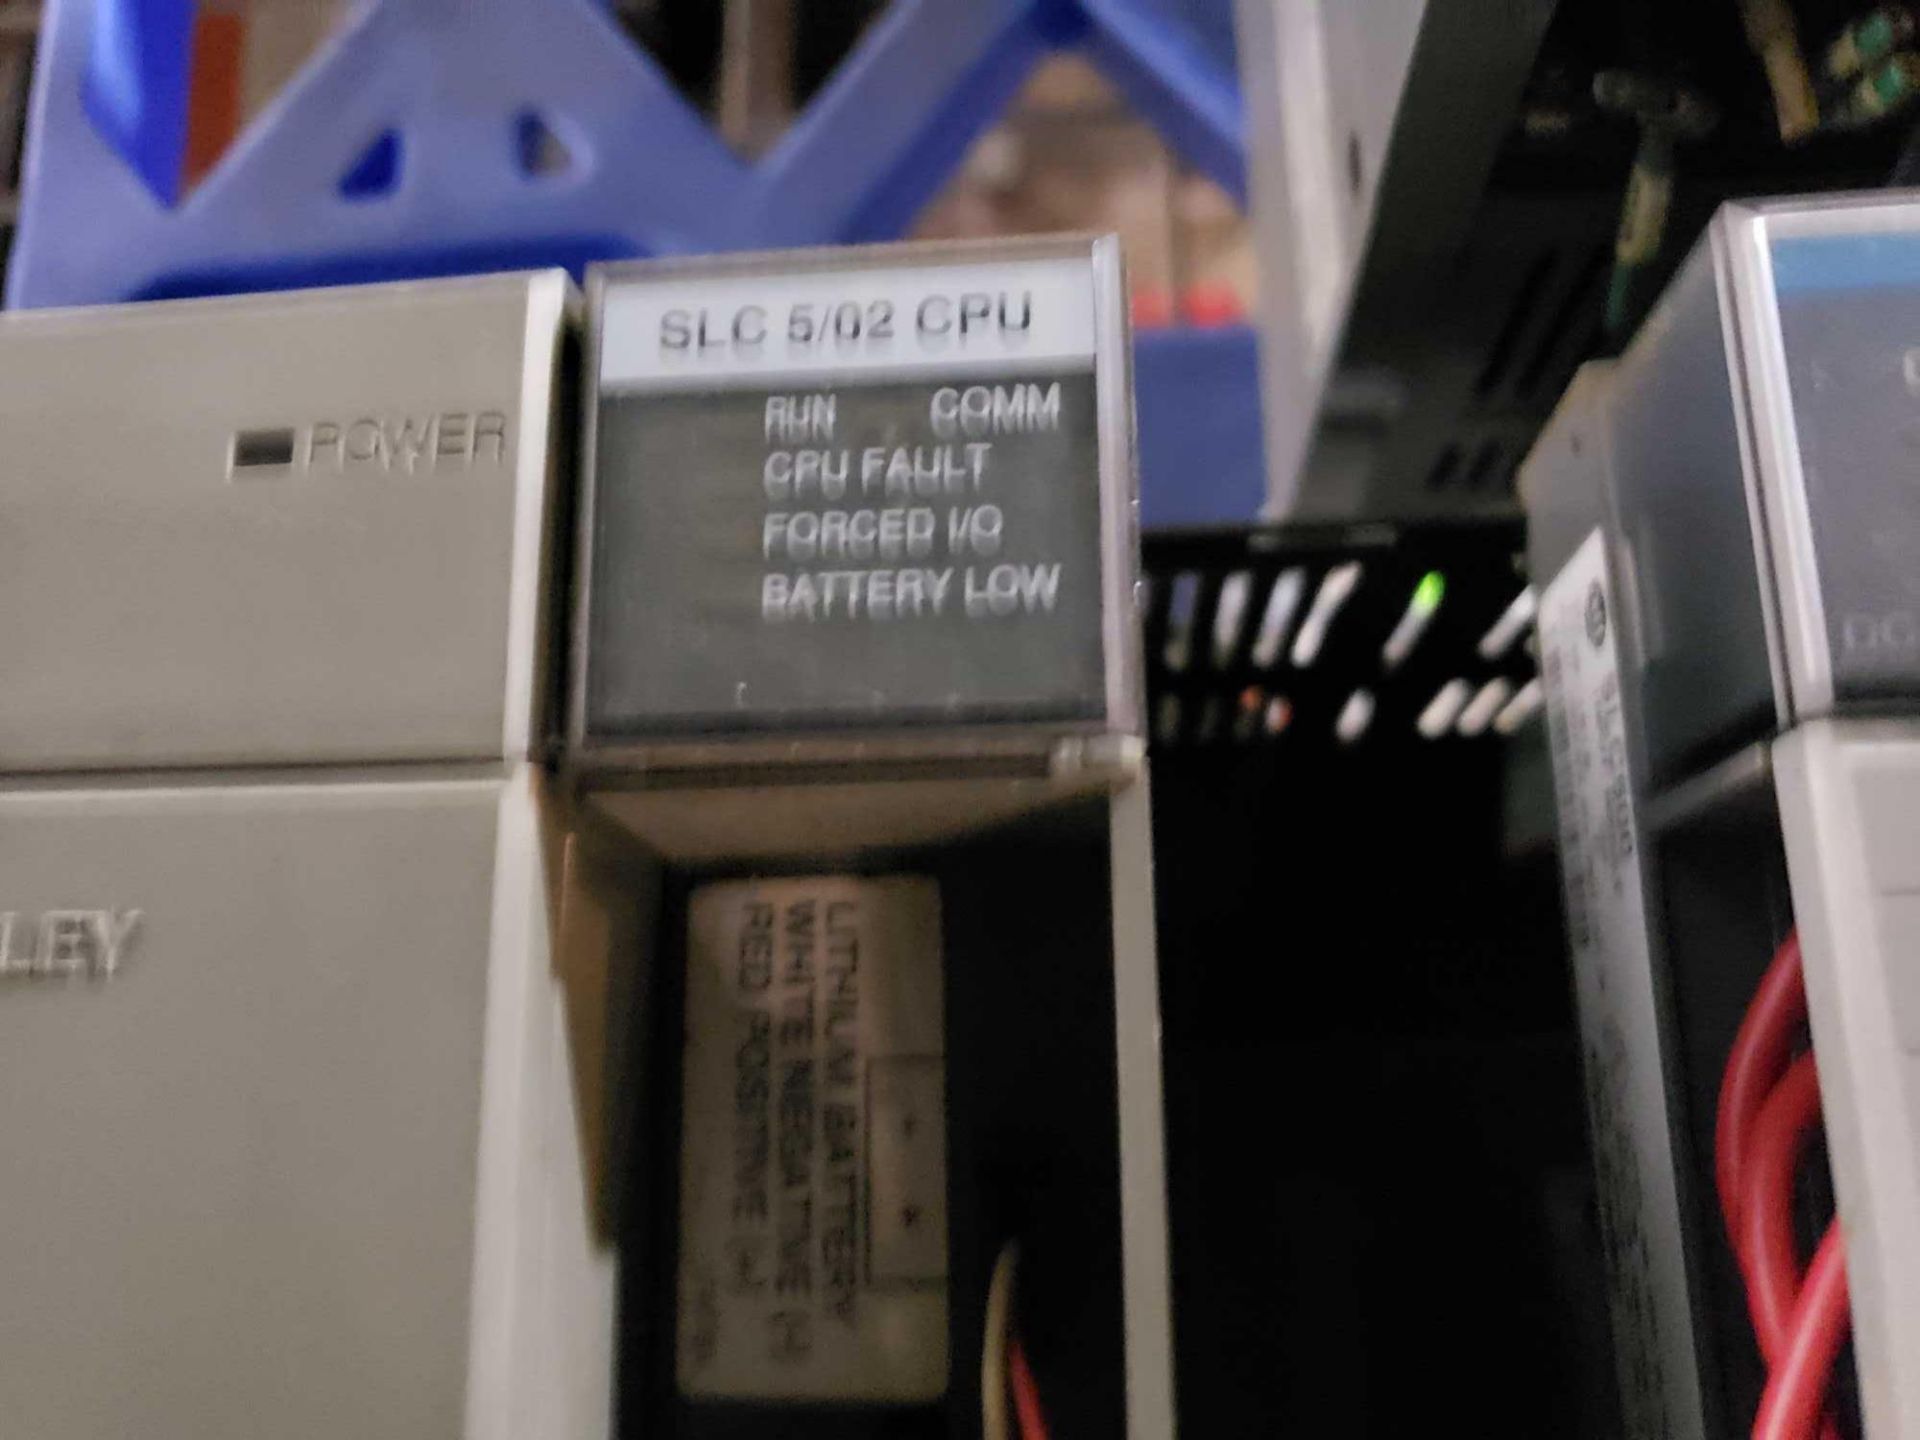 Allen Bradley SLC500 rack as pictured. Includes SCL 5/02 CPU. - Image 2 of 2